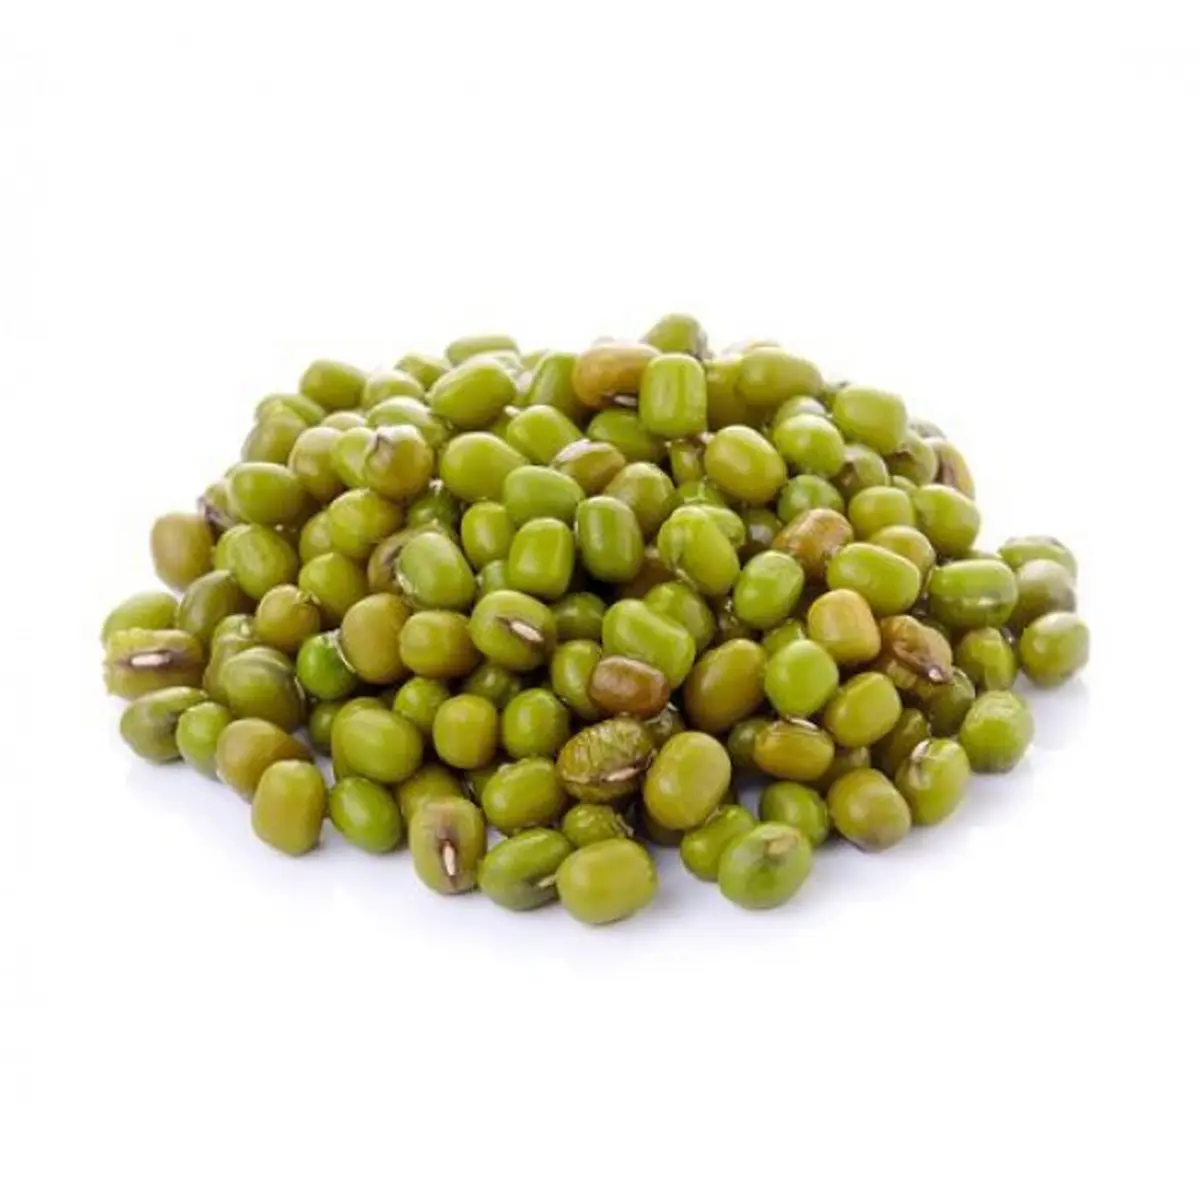 Mung beans small green beans with a mild herbal taste and light nutty aroma vegetarian food